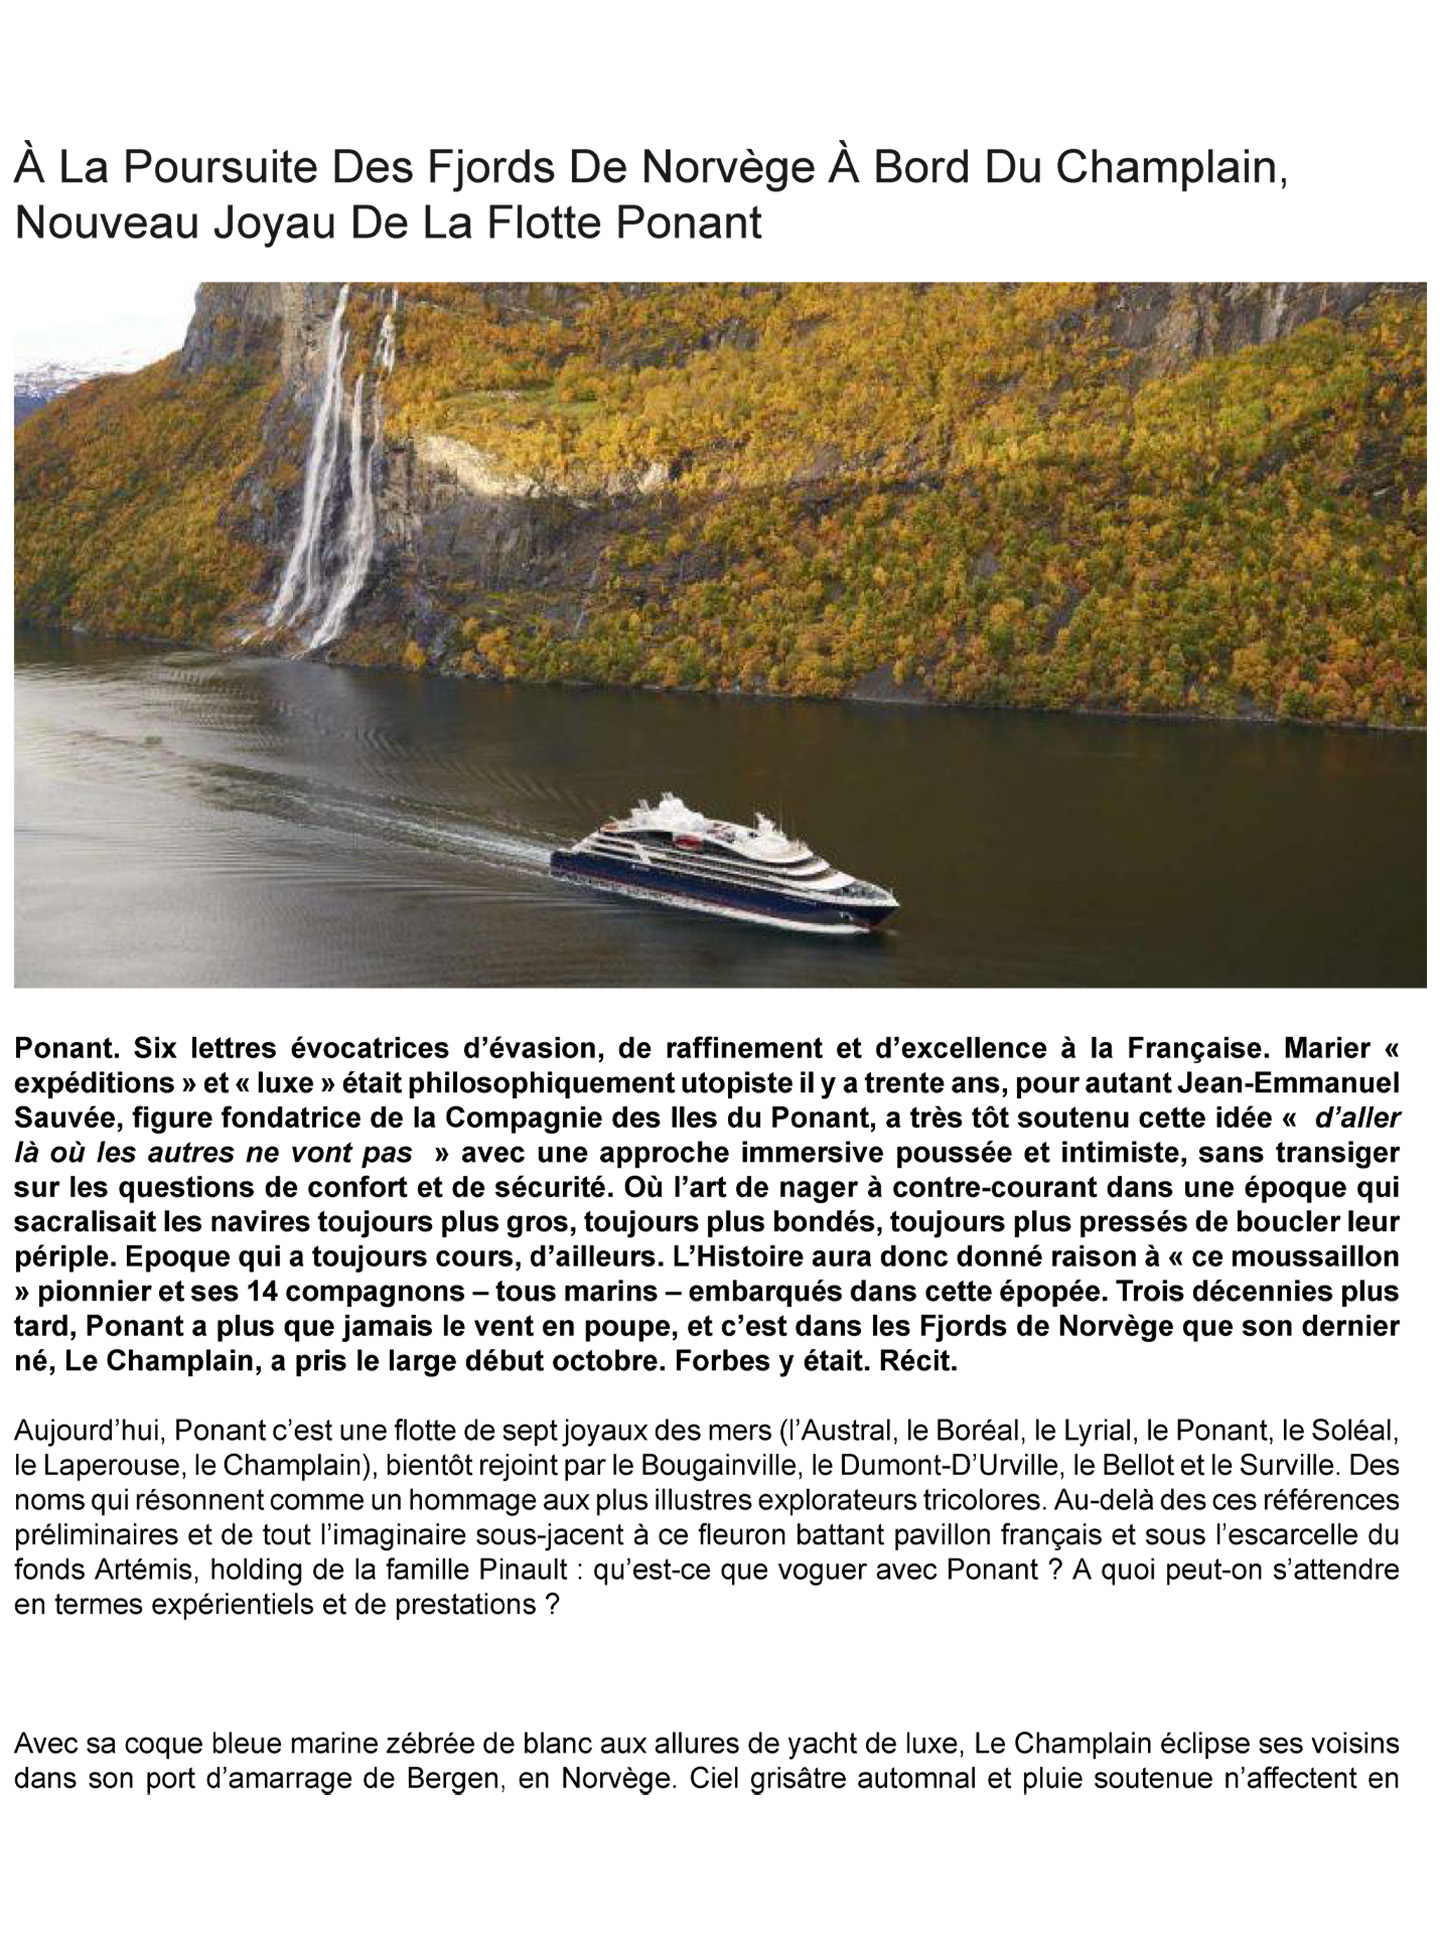 article on the champlain of the ponant explorers designed by the interior design studio jean-philippe nuel, luxury cruise ship